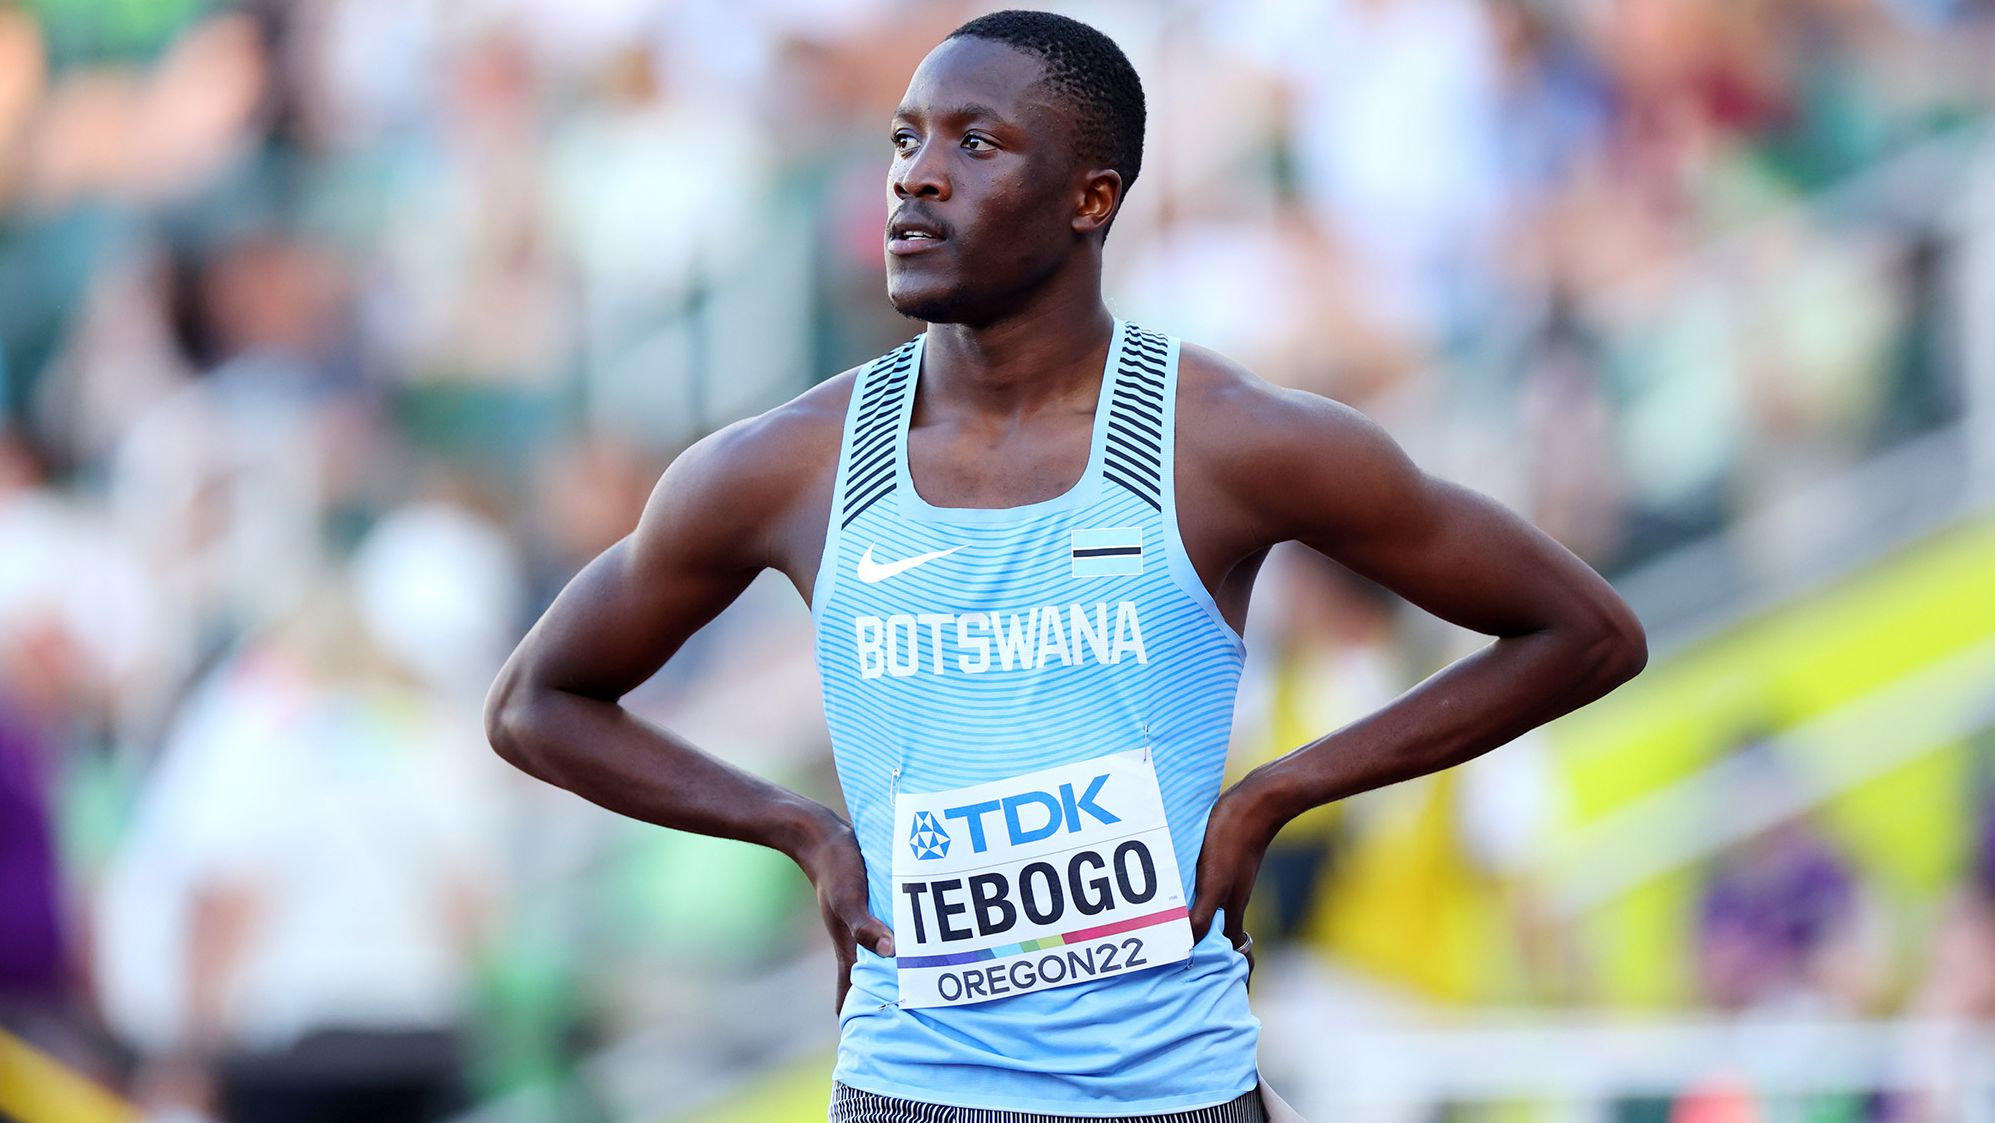 Tebogo looks on during the 100-meter heats at this year's World Athletics Championships in Oregon.